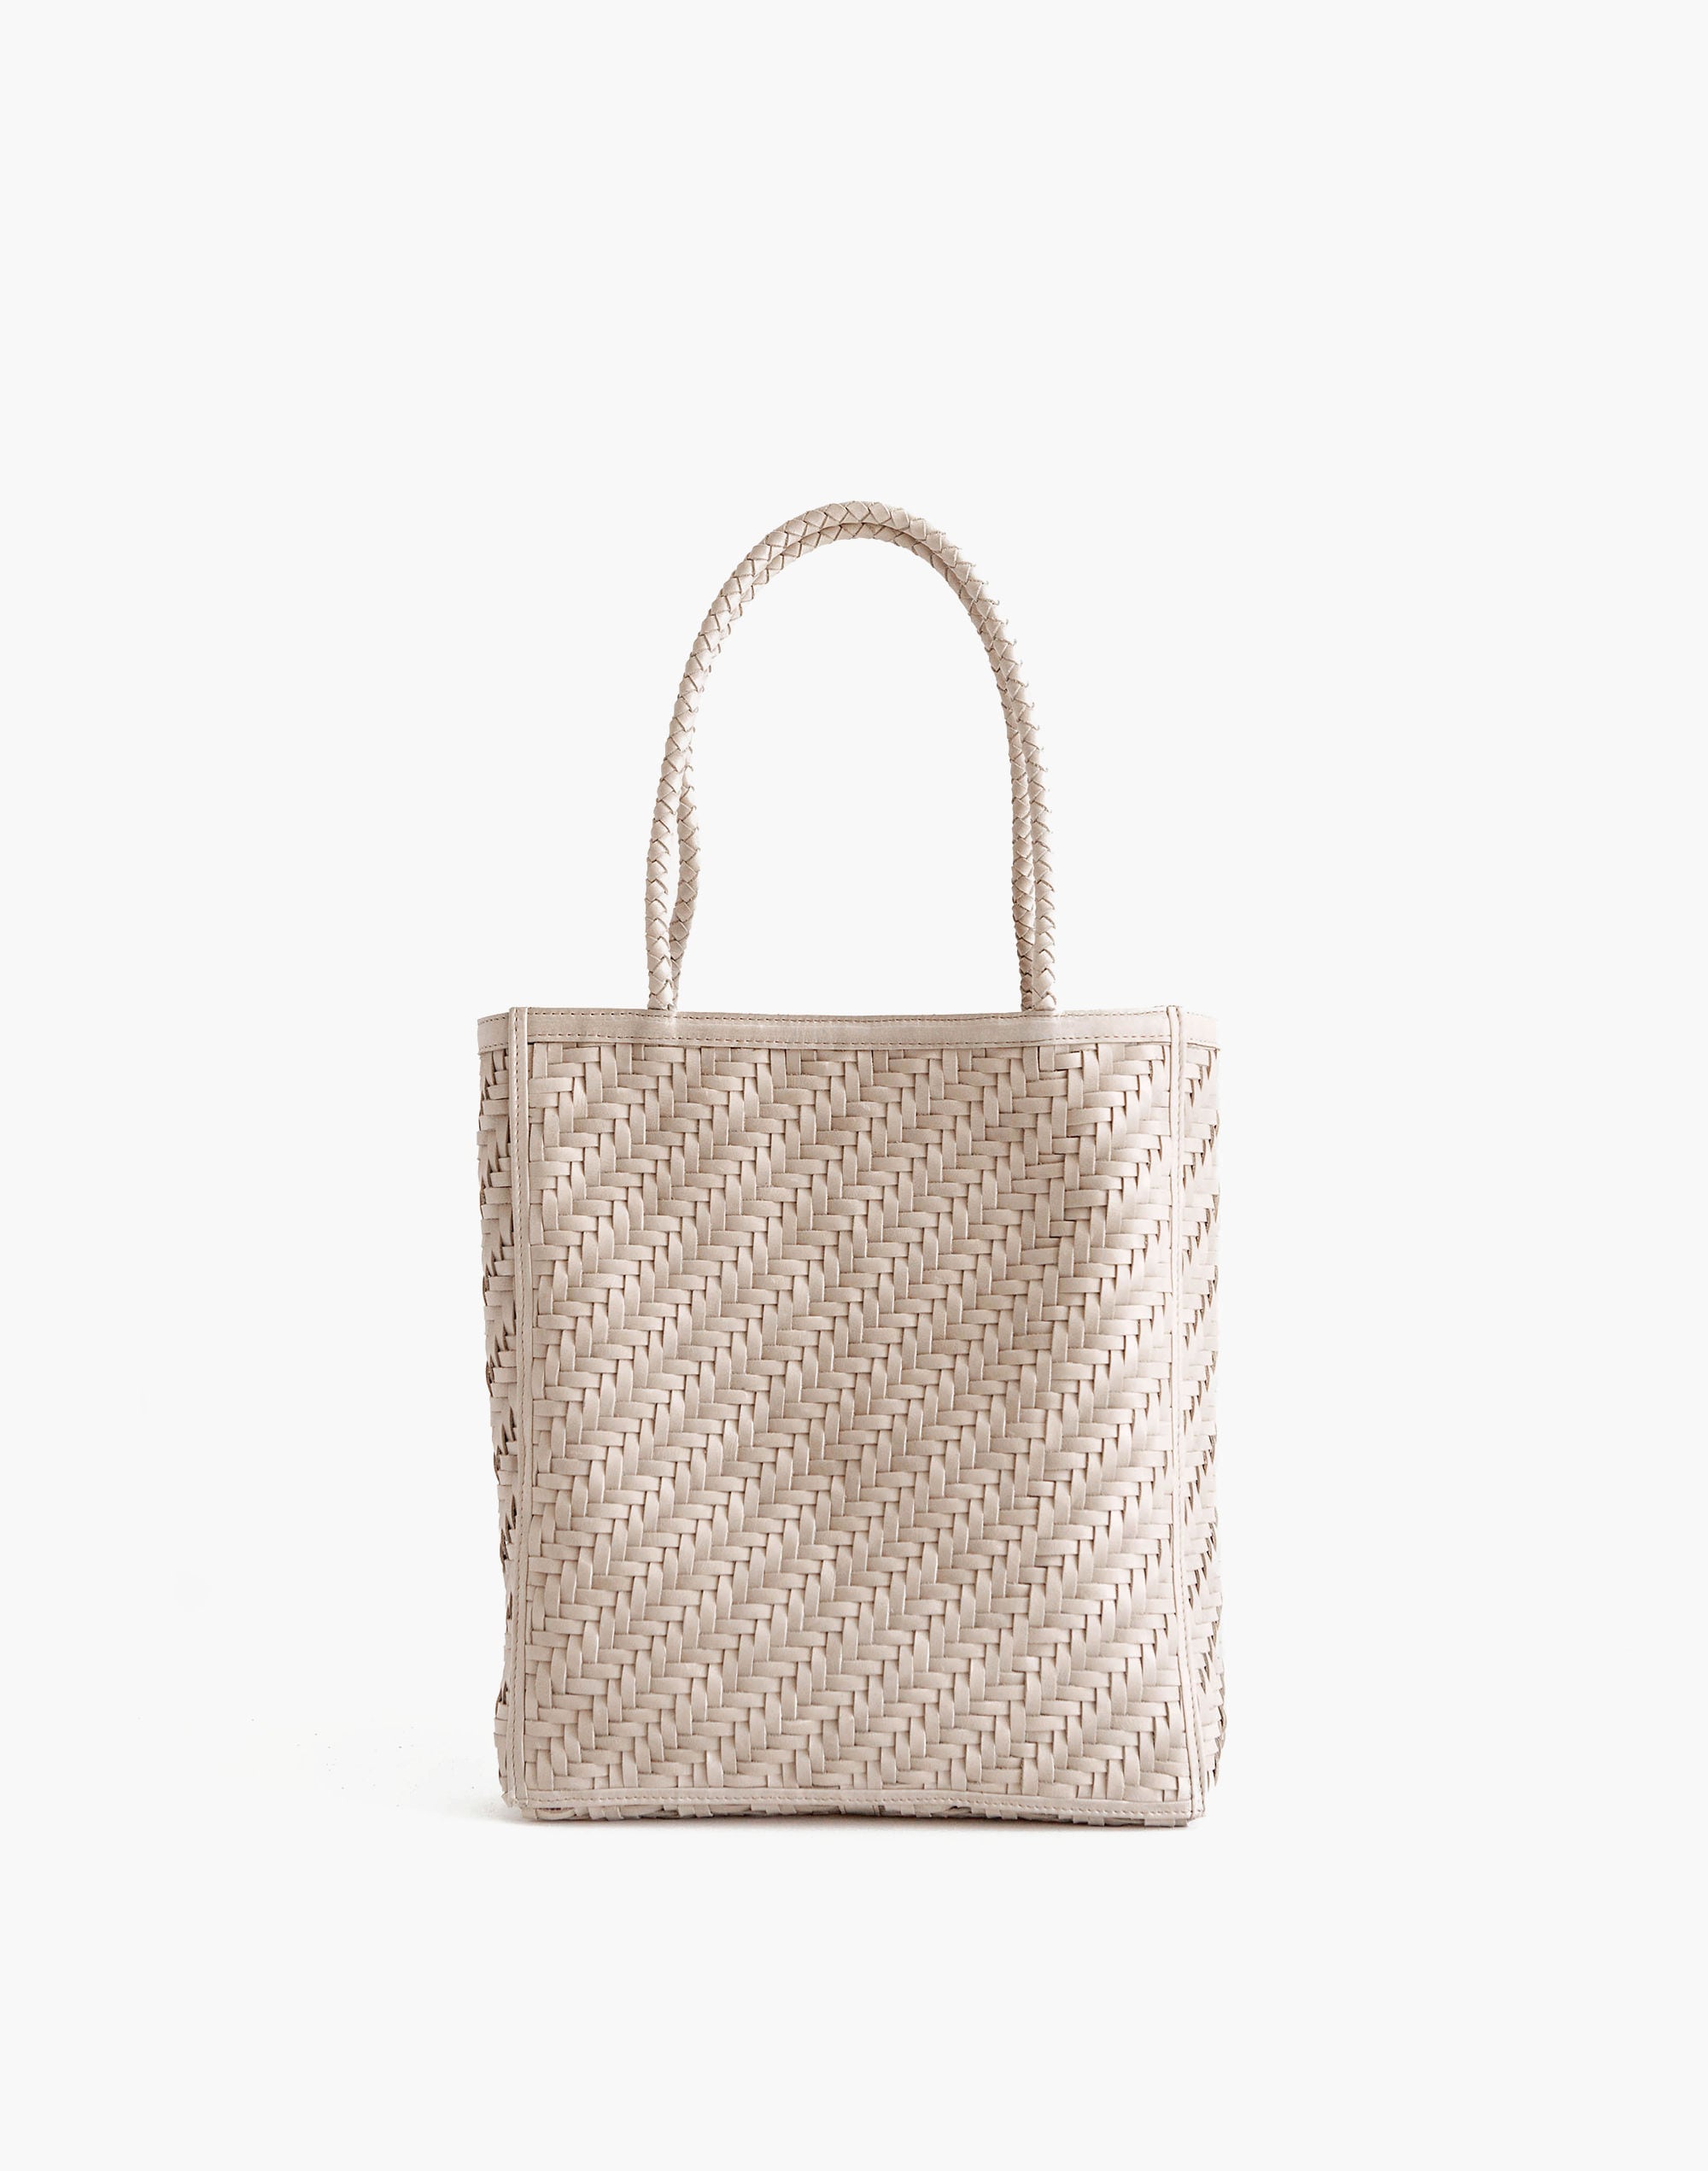 Bembien Le Tote - Sienna, Woven Leather Tote Bag